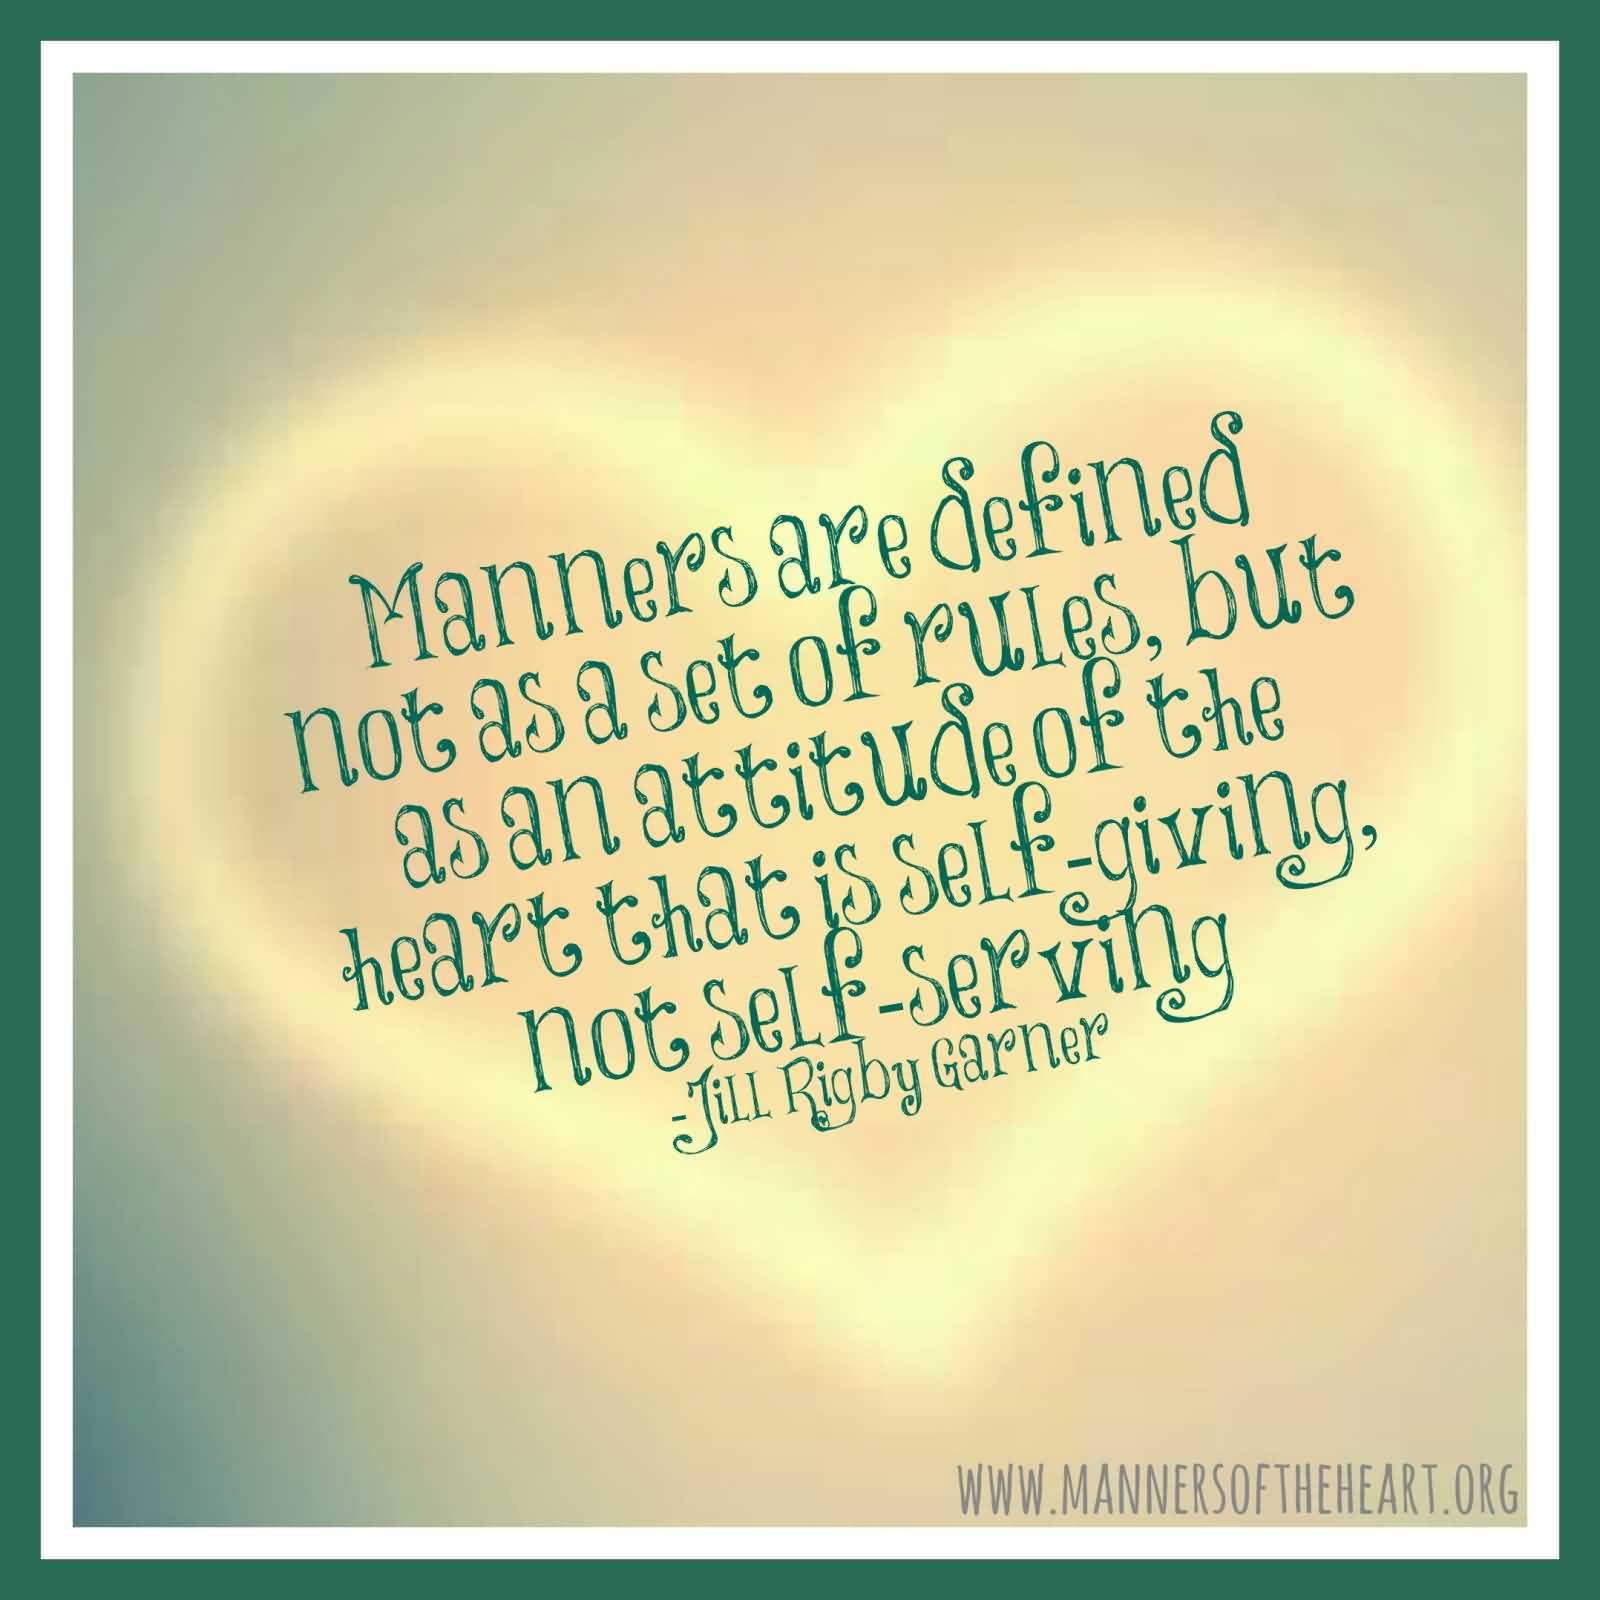 Manners are defined not as a set of rules, but as an attitude of the haert that is self-giving, not … Jill Rigby Garner